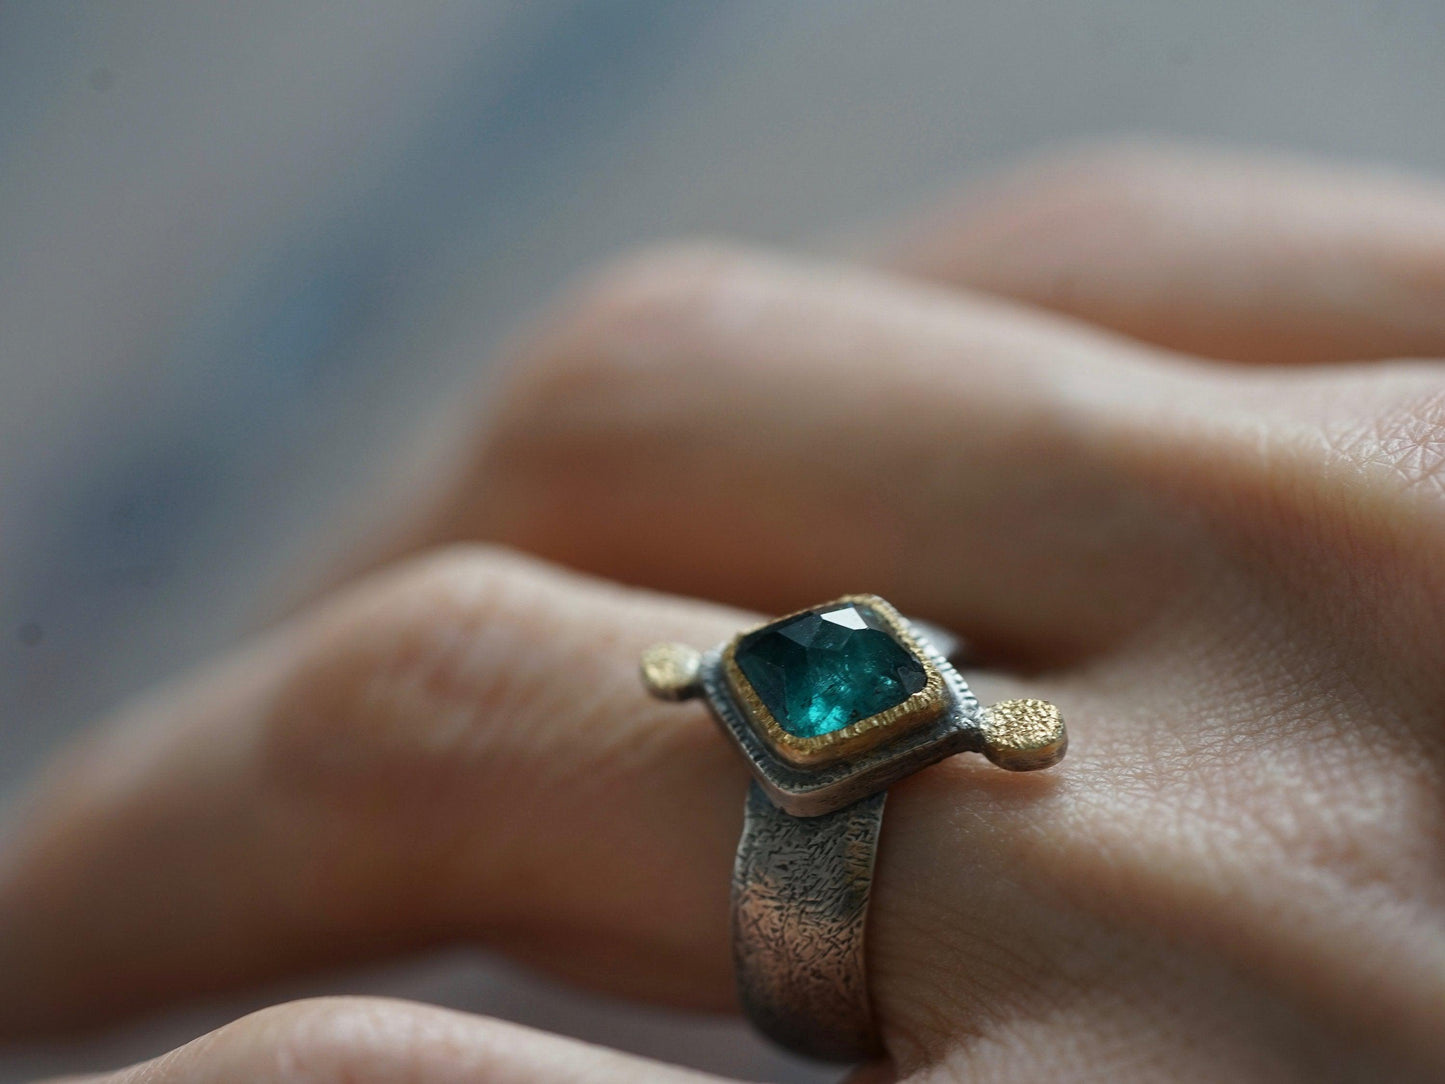 Teal blue, faceted tourmaline and 22k gold statement ring, size 6